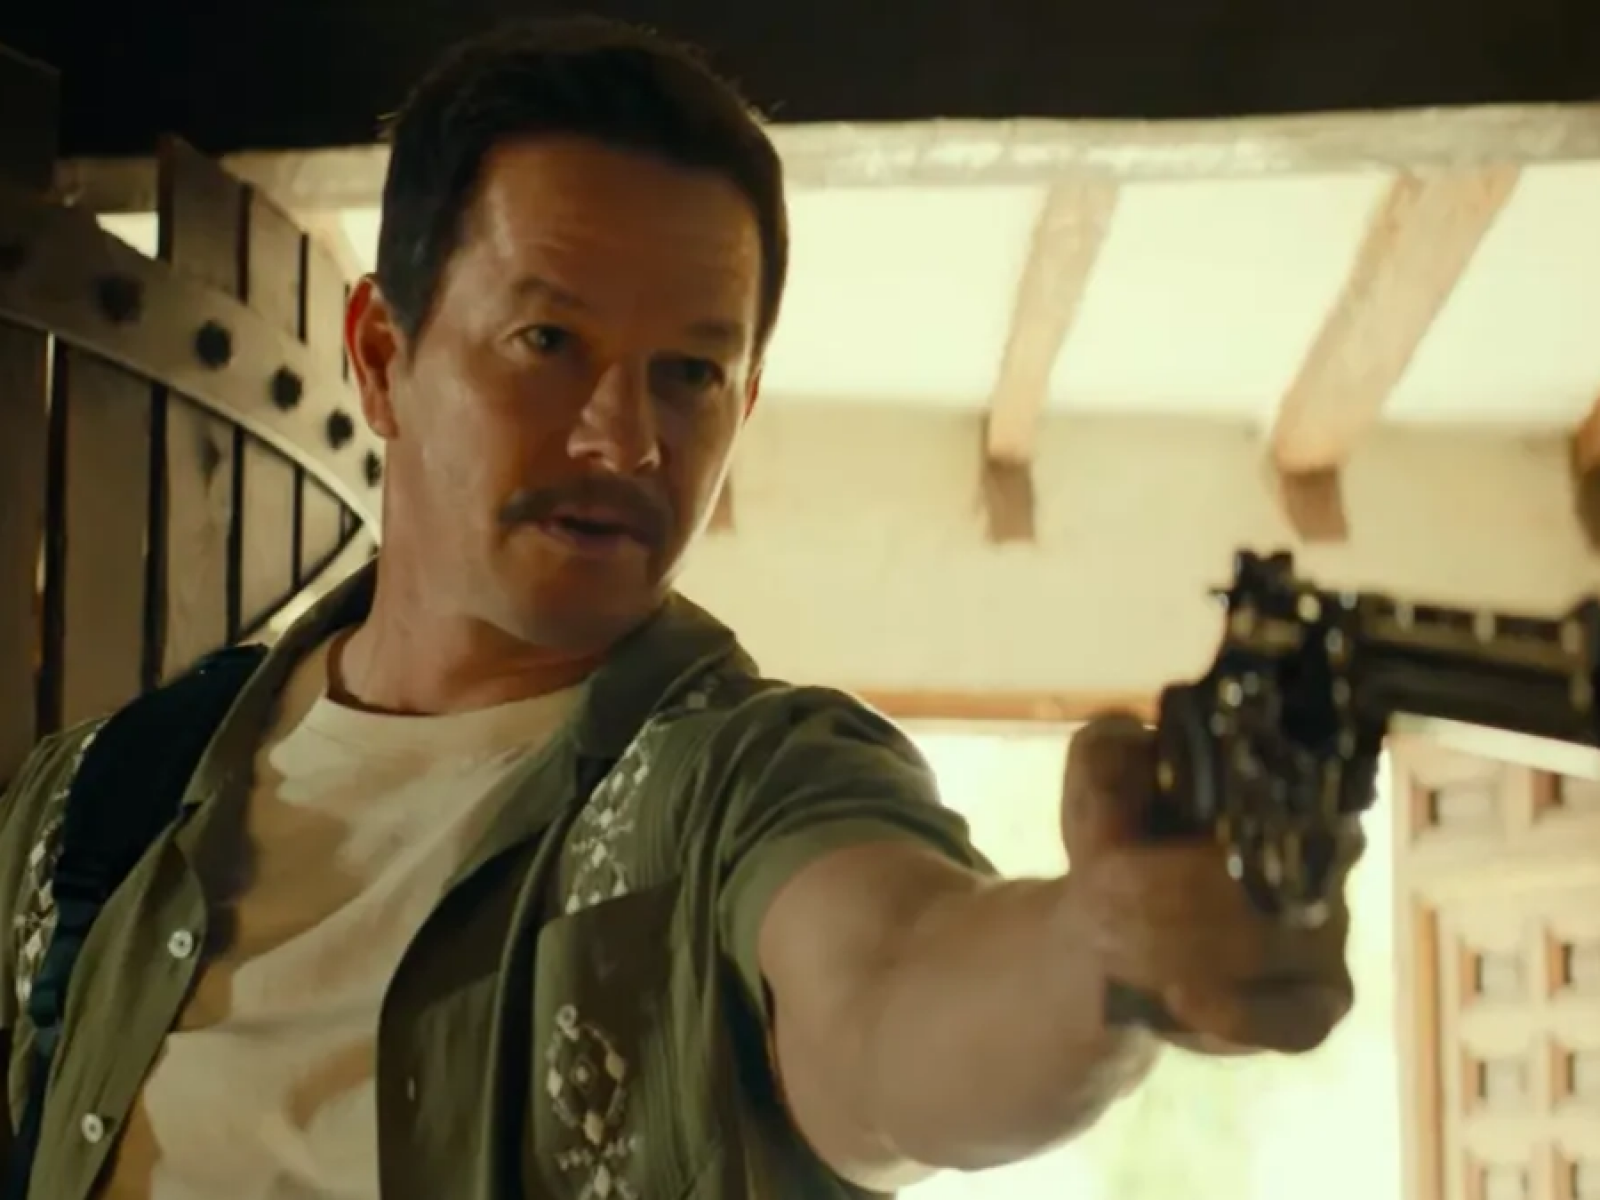 Uncharted 2': What it Would Take for Mark Wahlberg to Make Movie Sequel